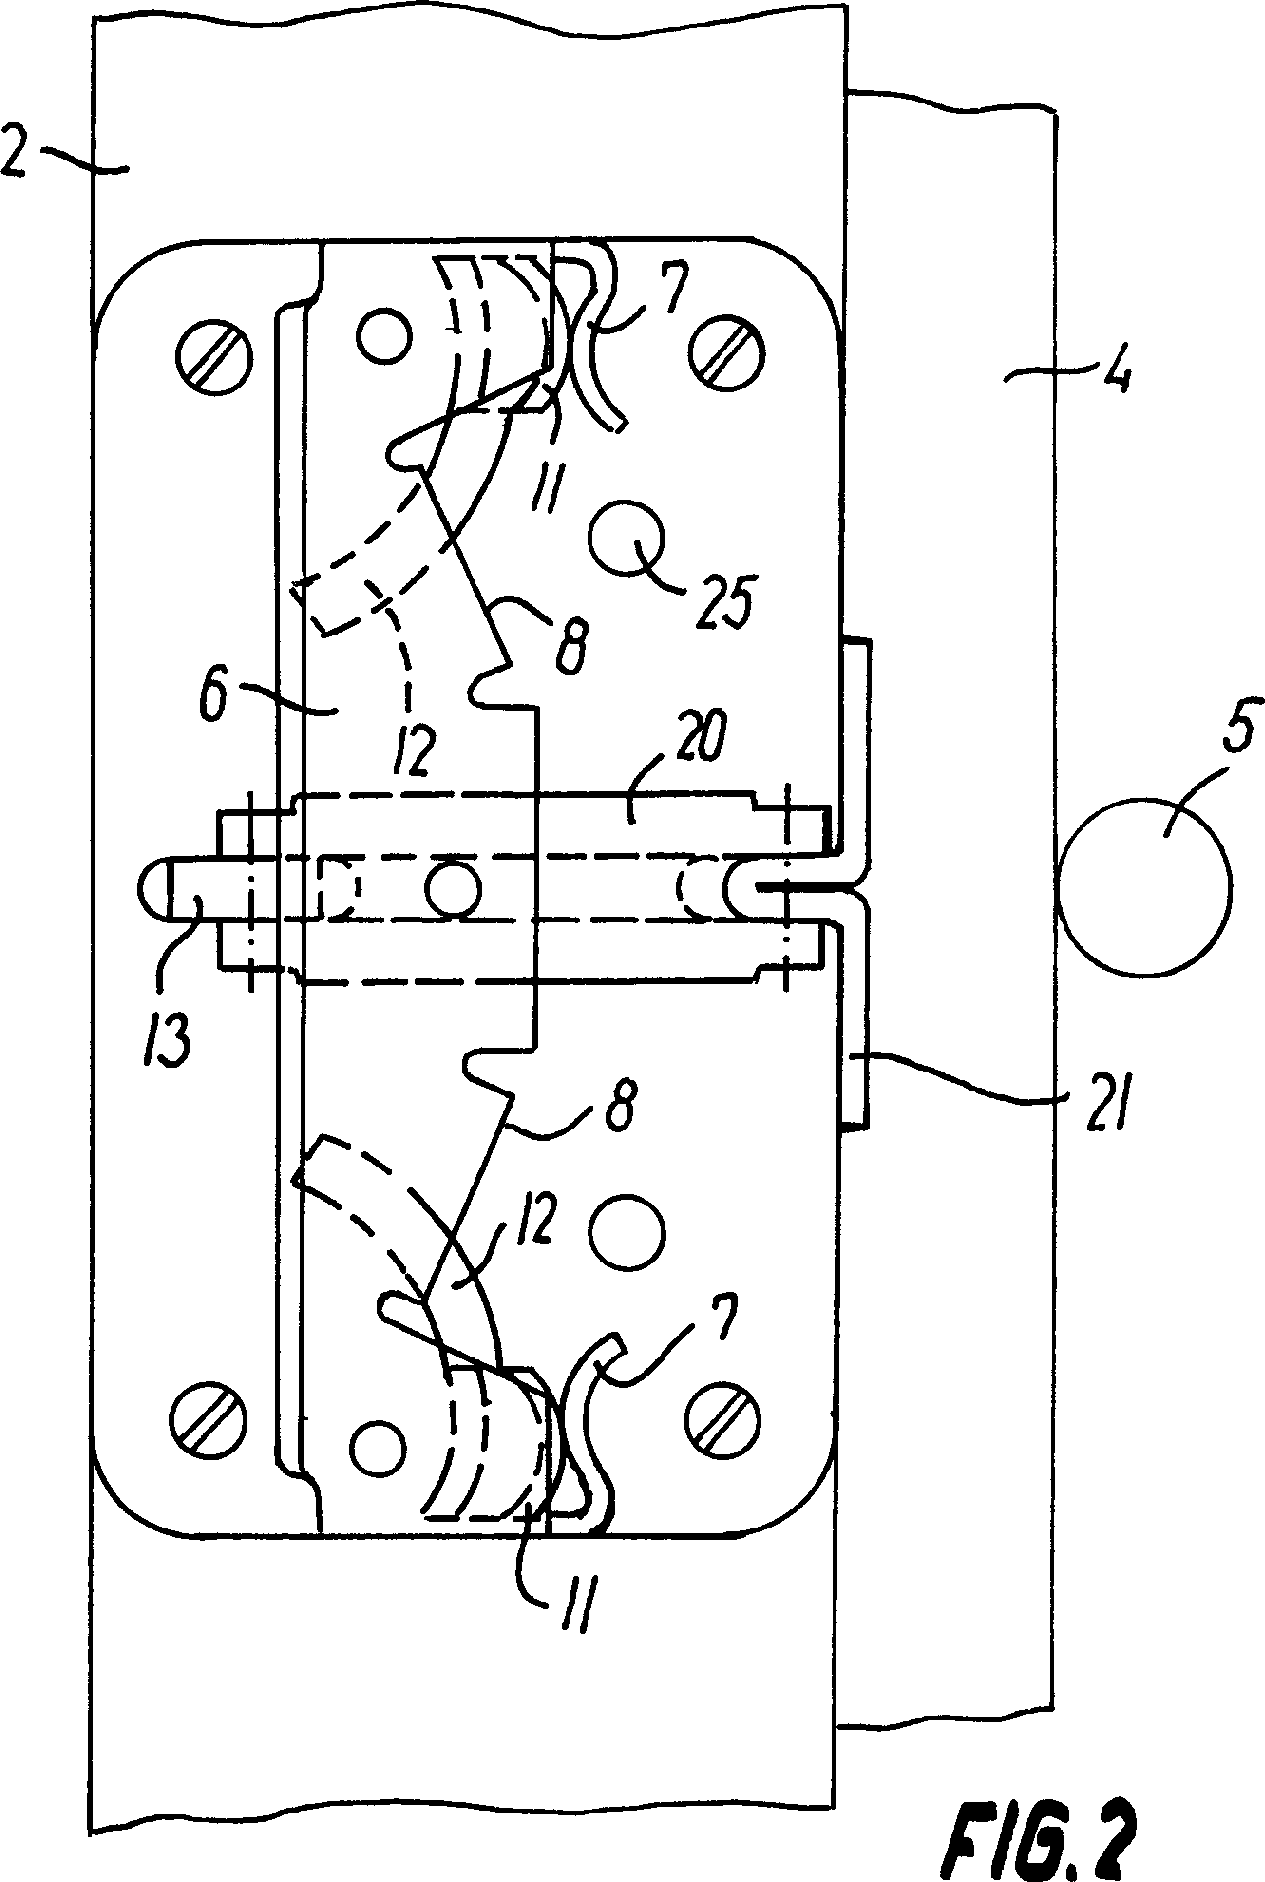 A locking device for a ventilating window